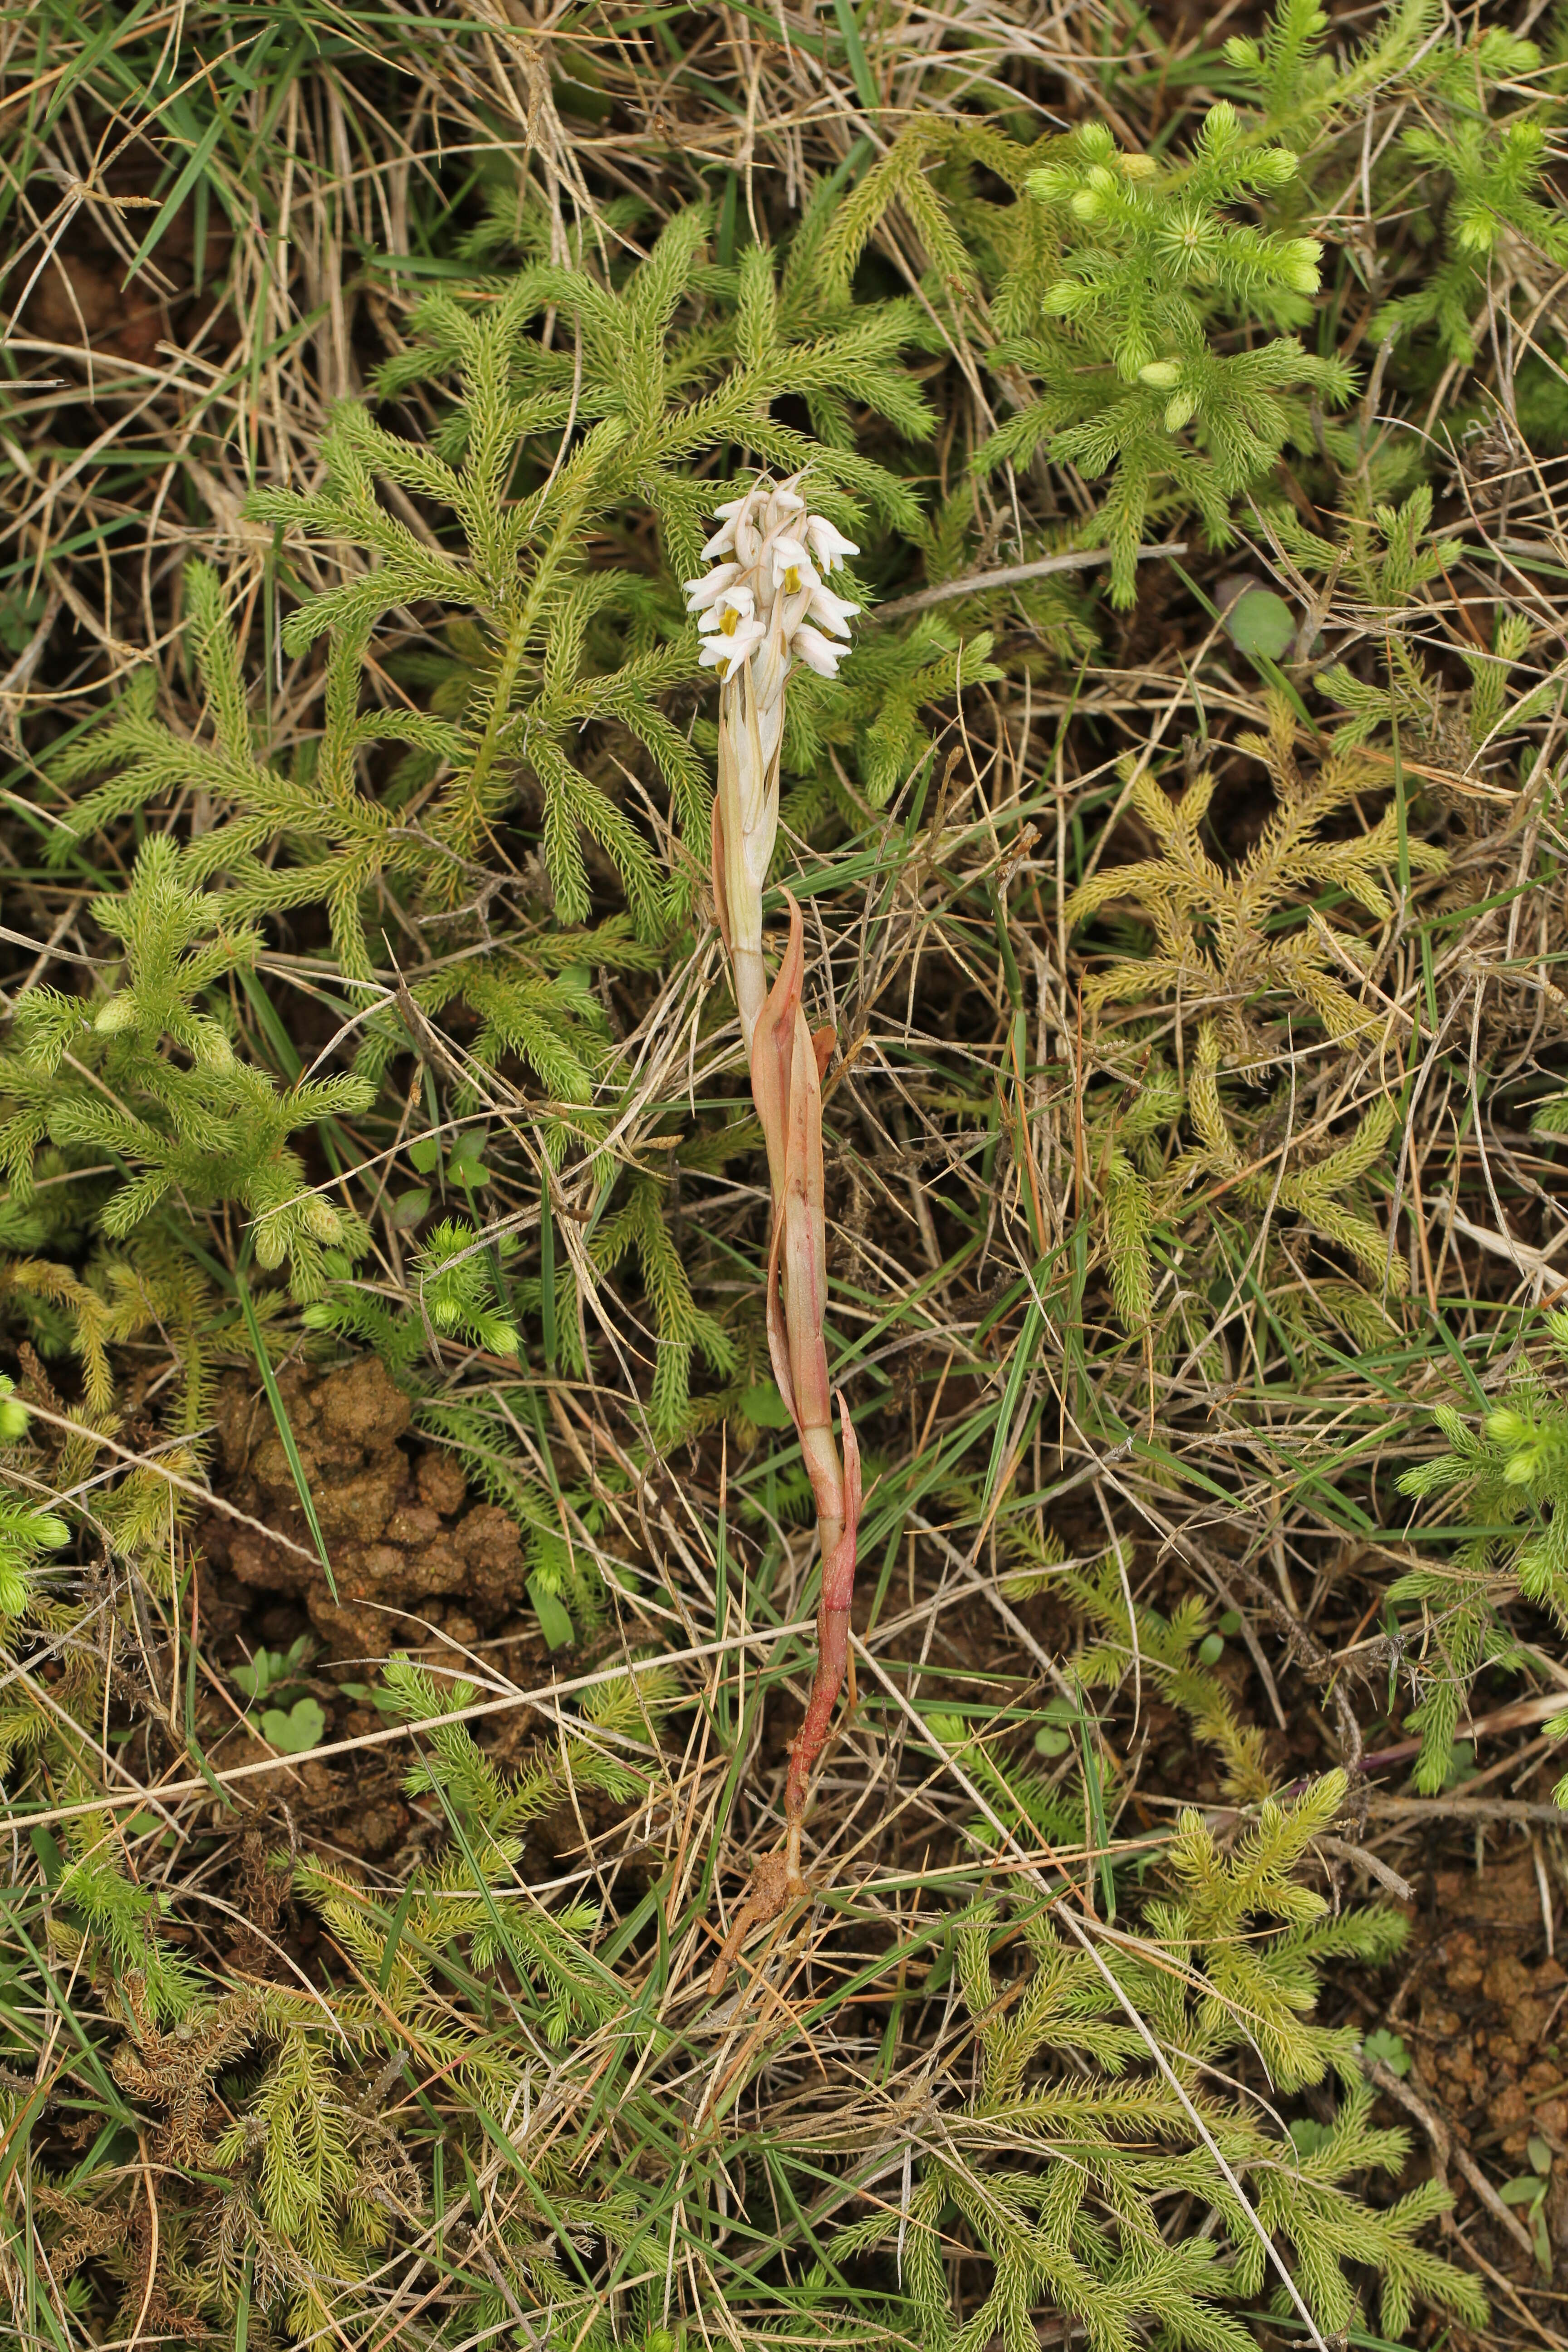 Image of Lawn orchid